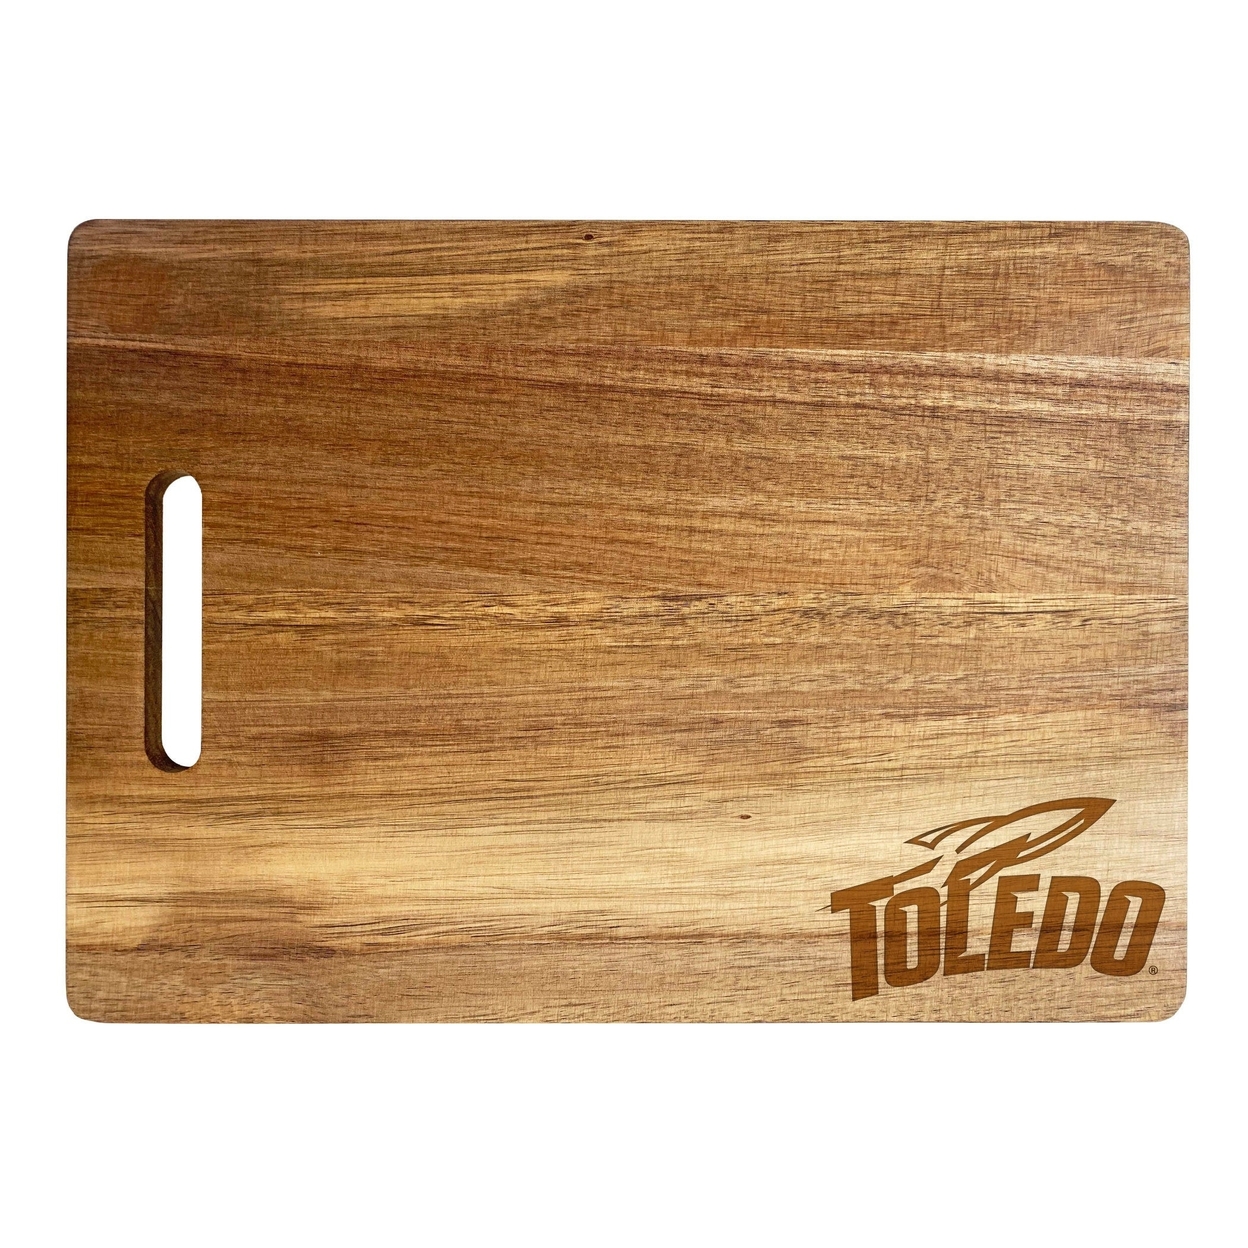 Toledo Rockets Engraved Wooden Cutting Board 10 X 14 Acacia Wood - Small Engraving